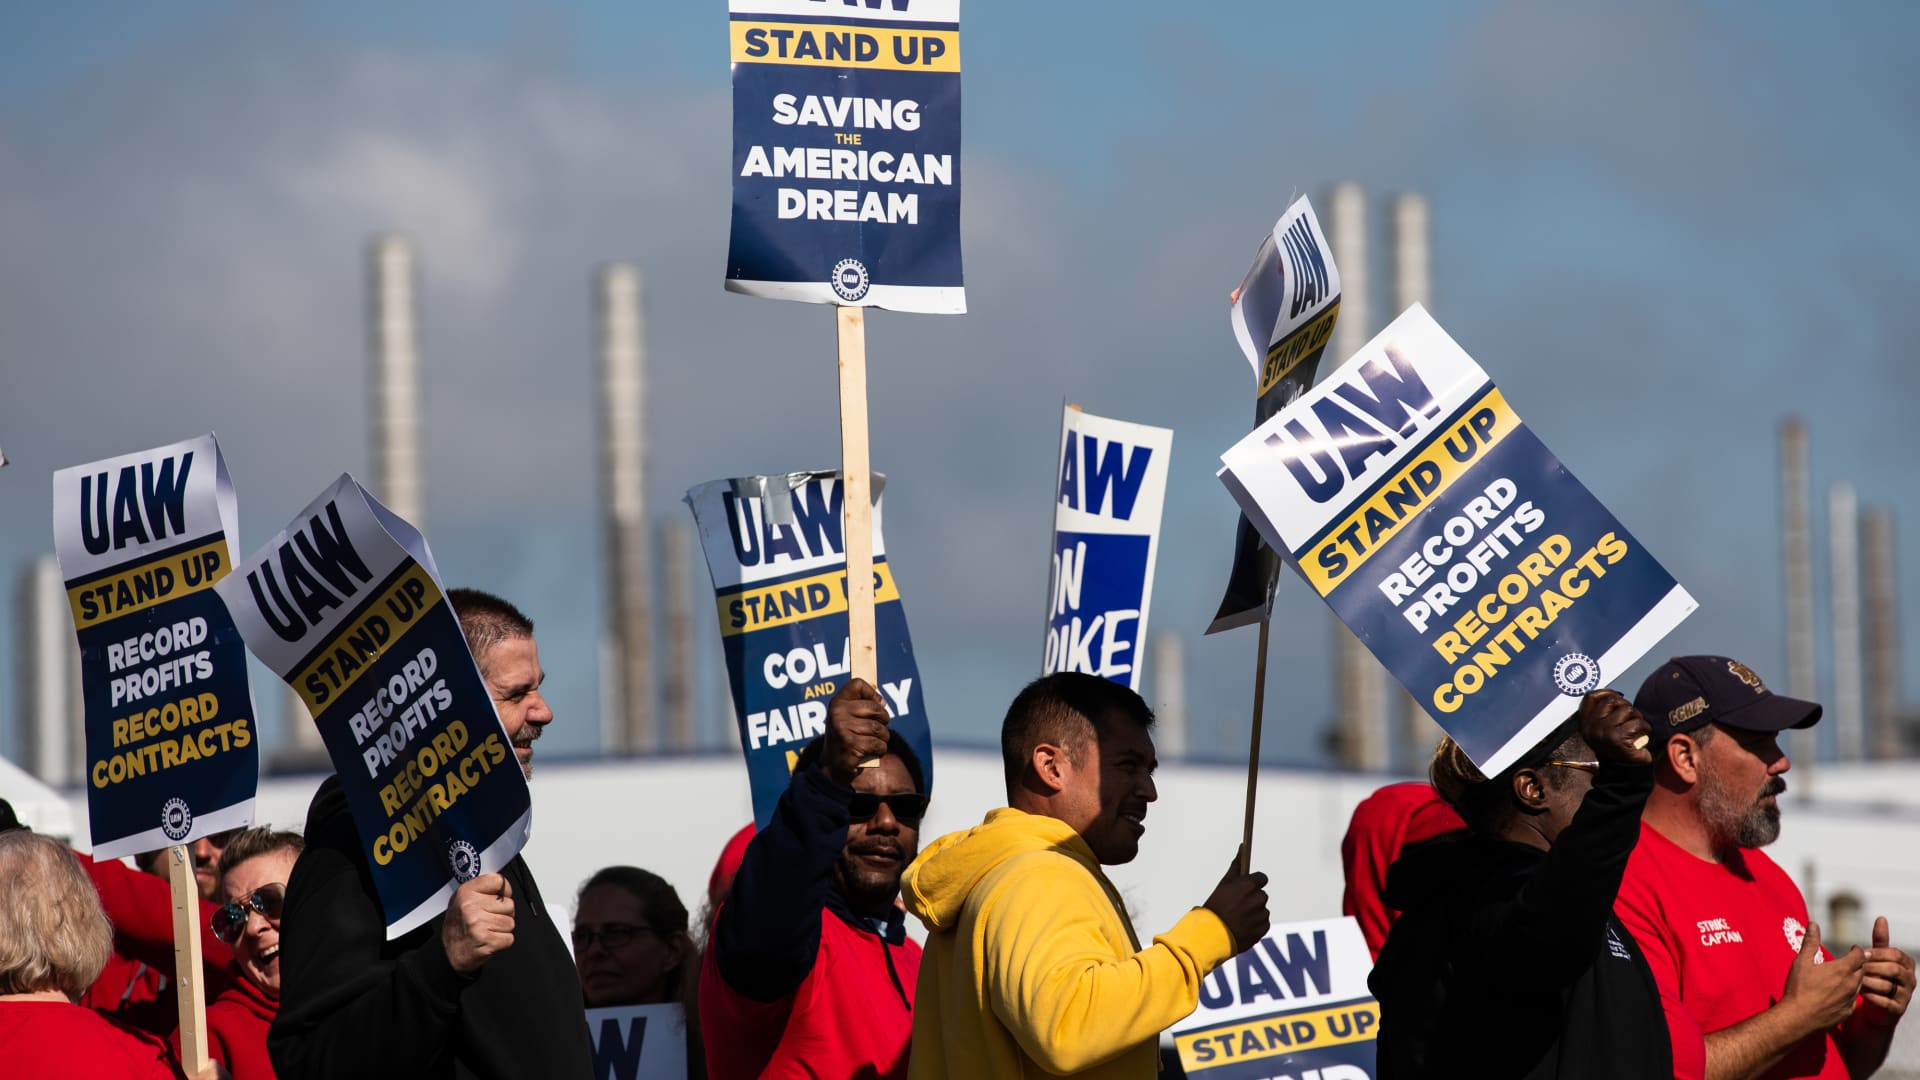 Striking unions impacting the economy at a level not seen in decades